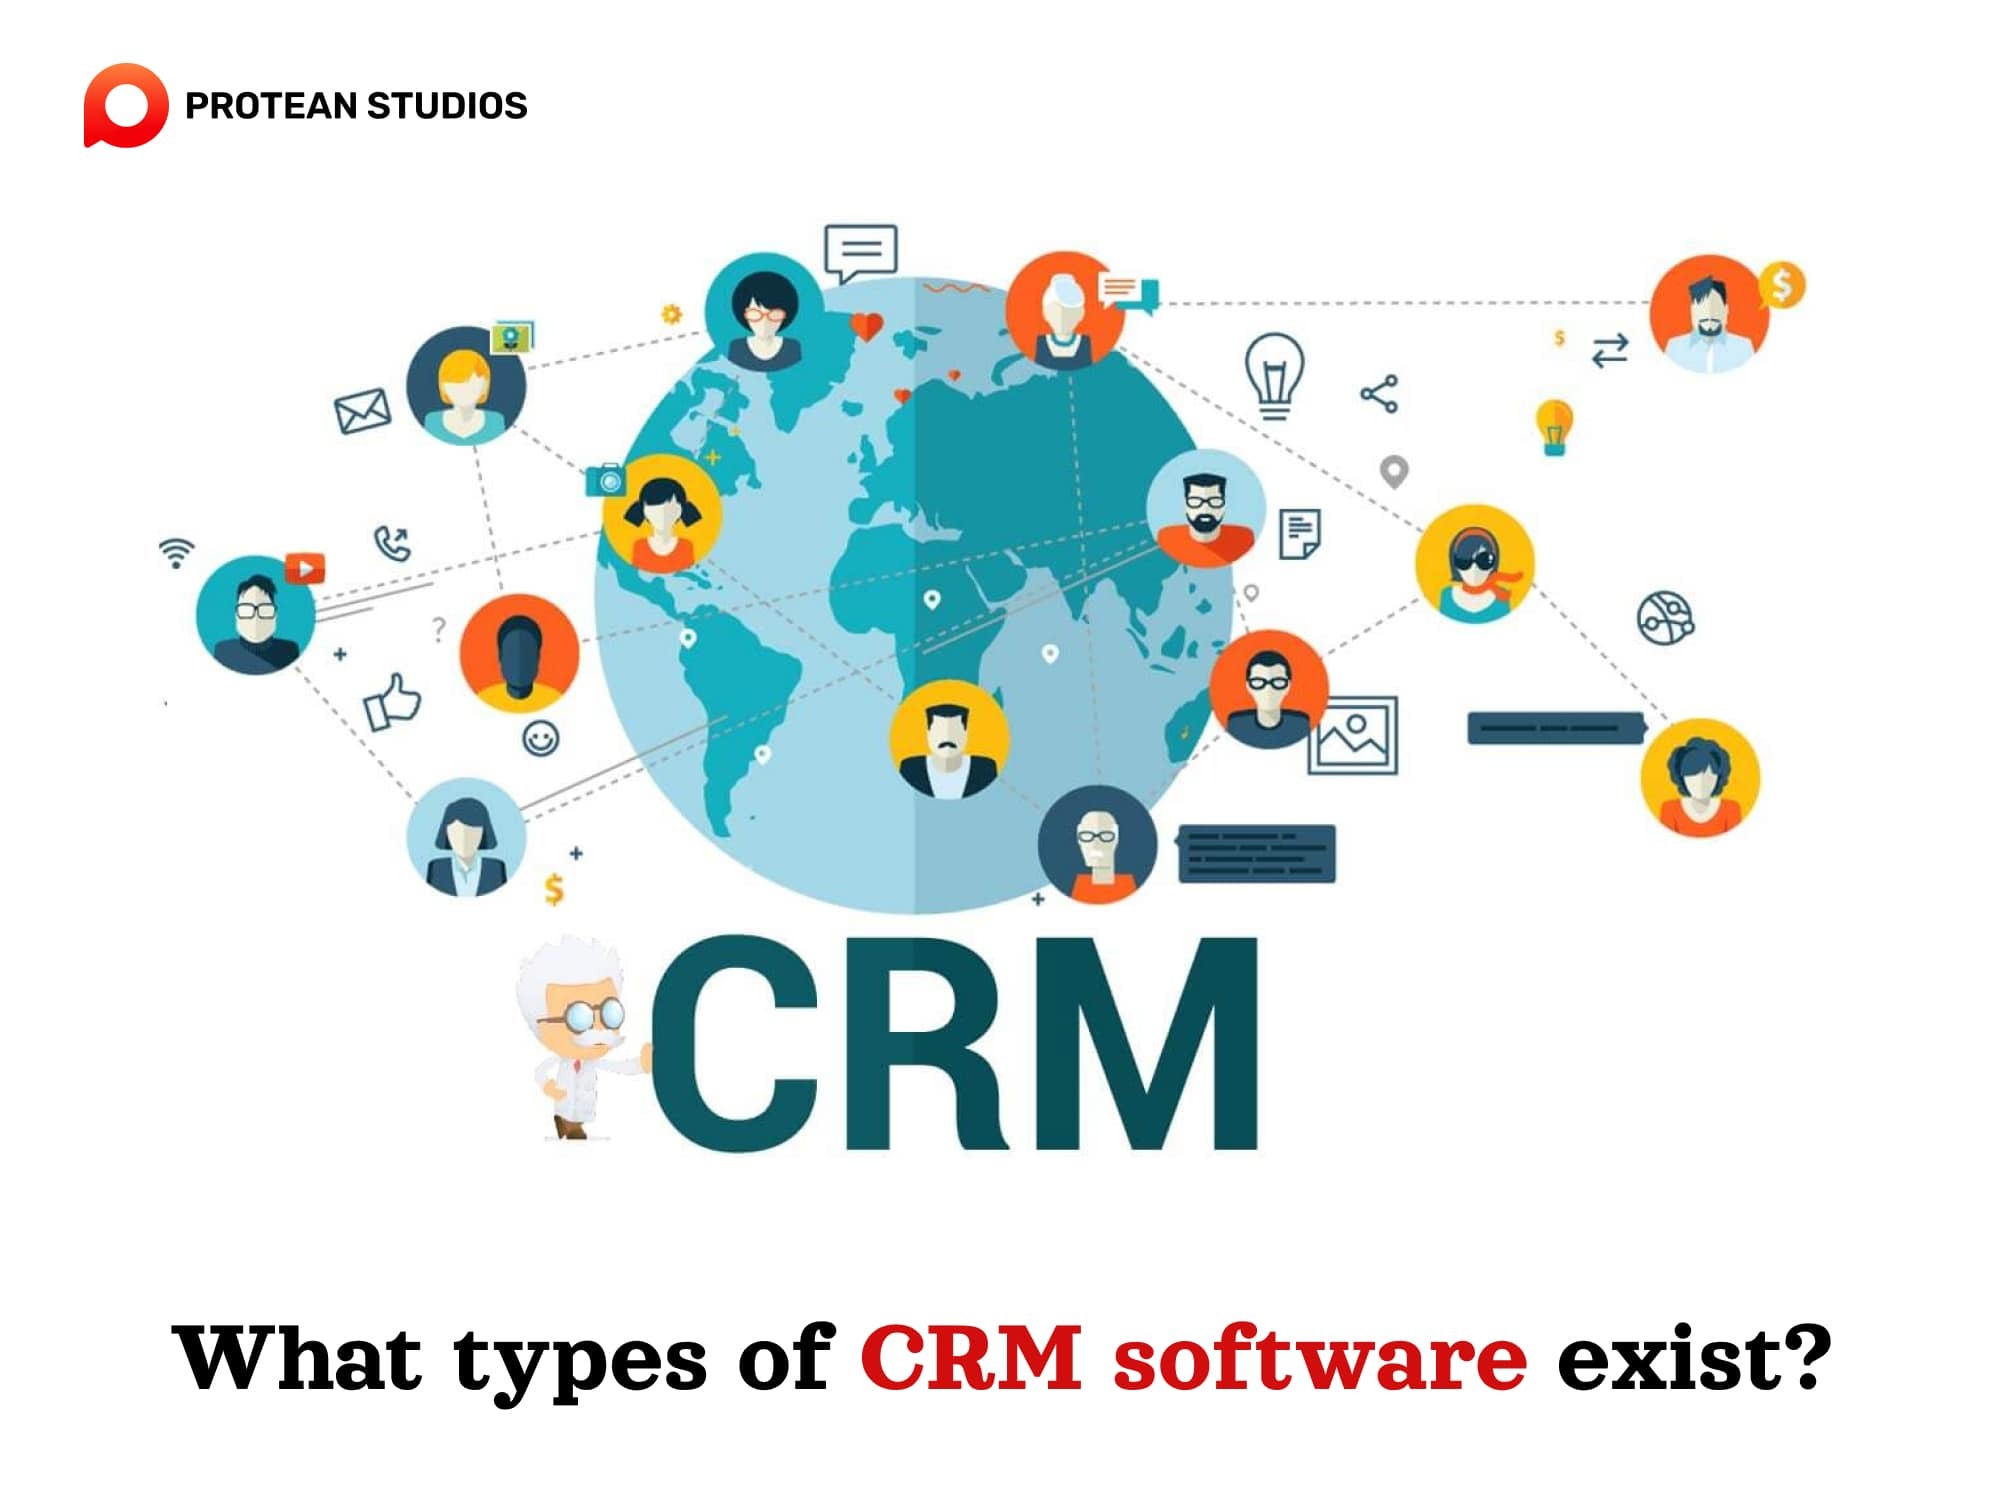 There are three main types of CRM systems